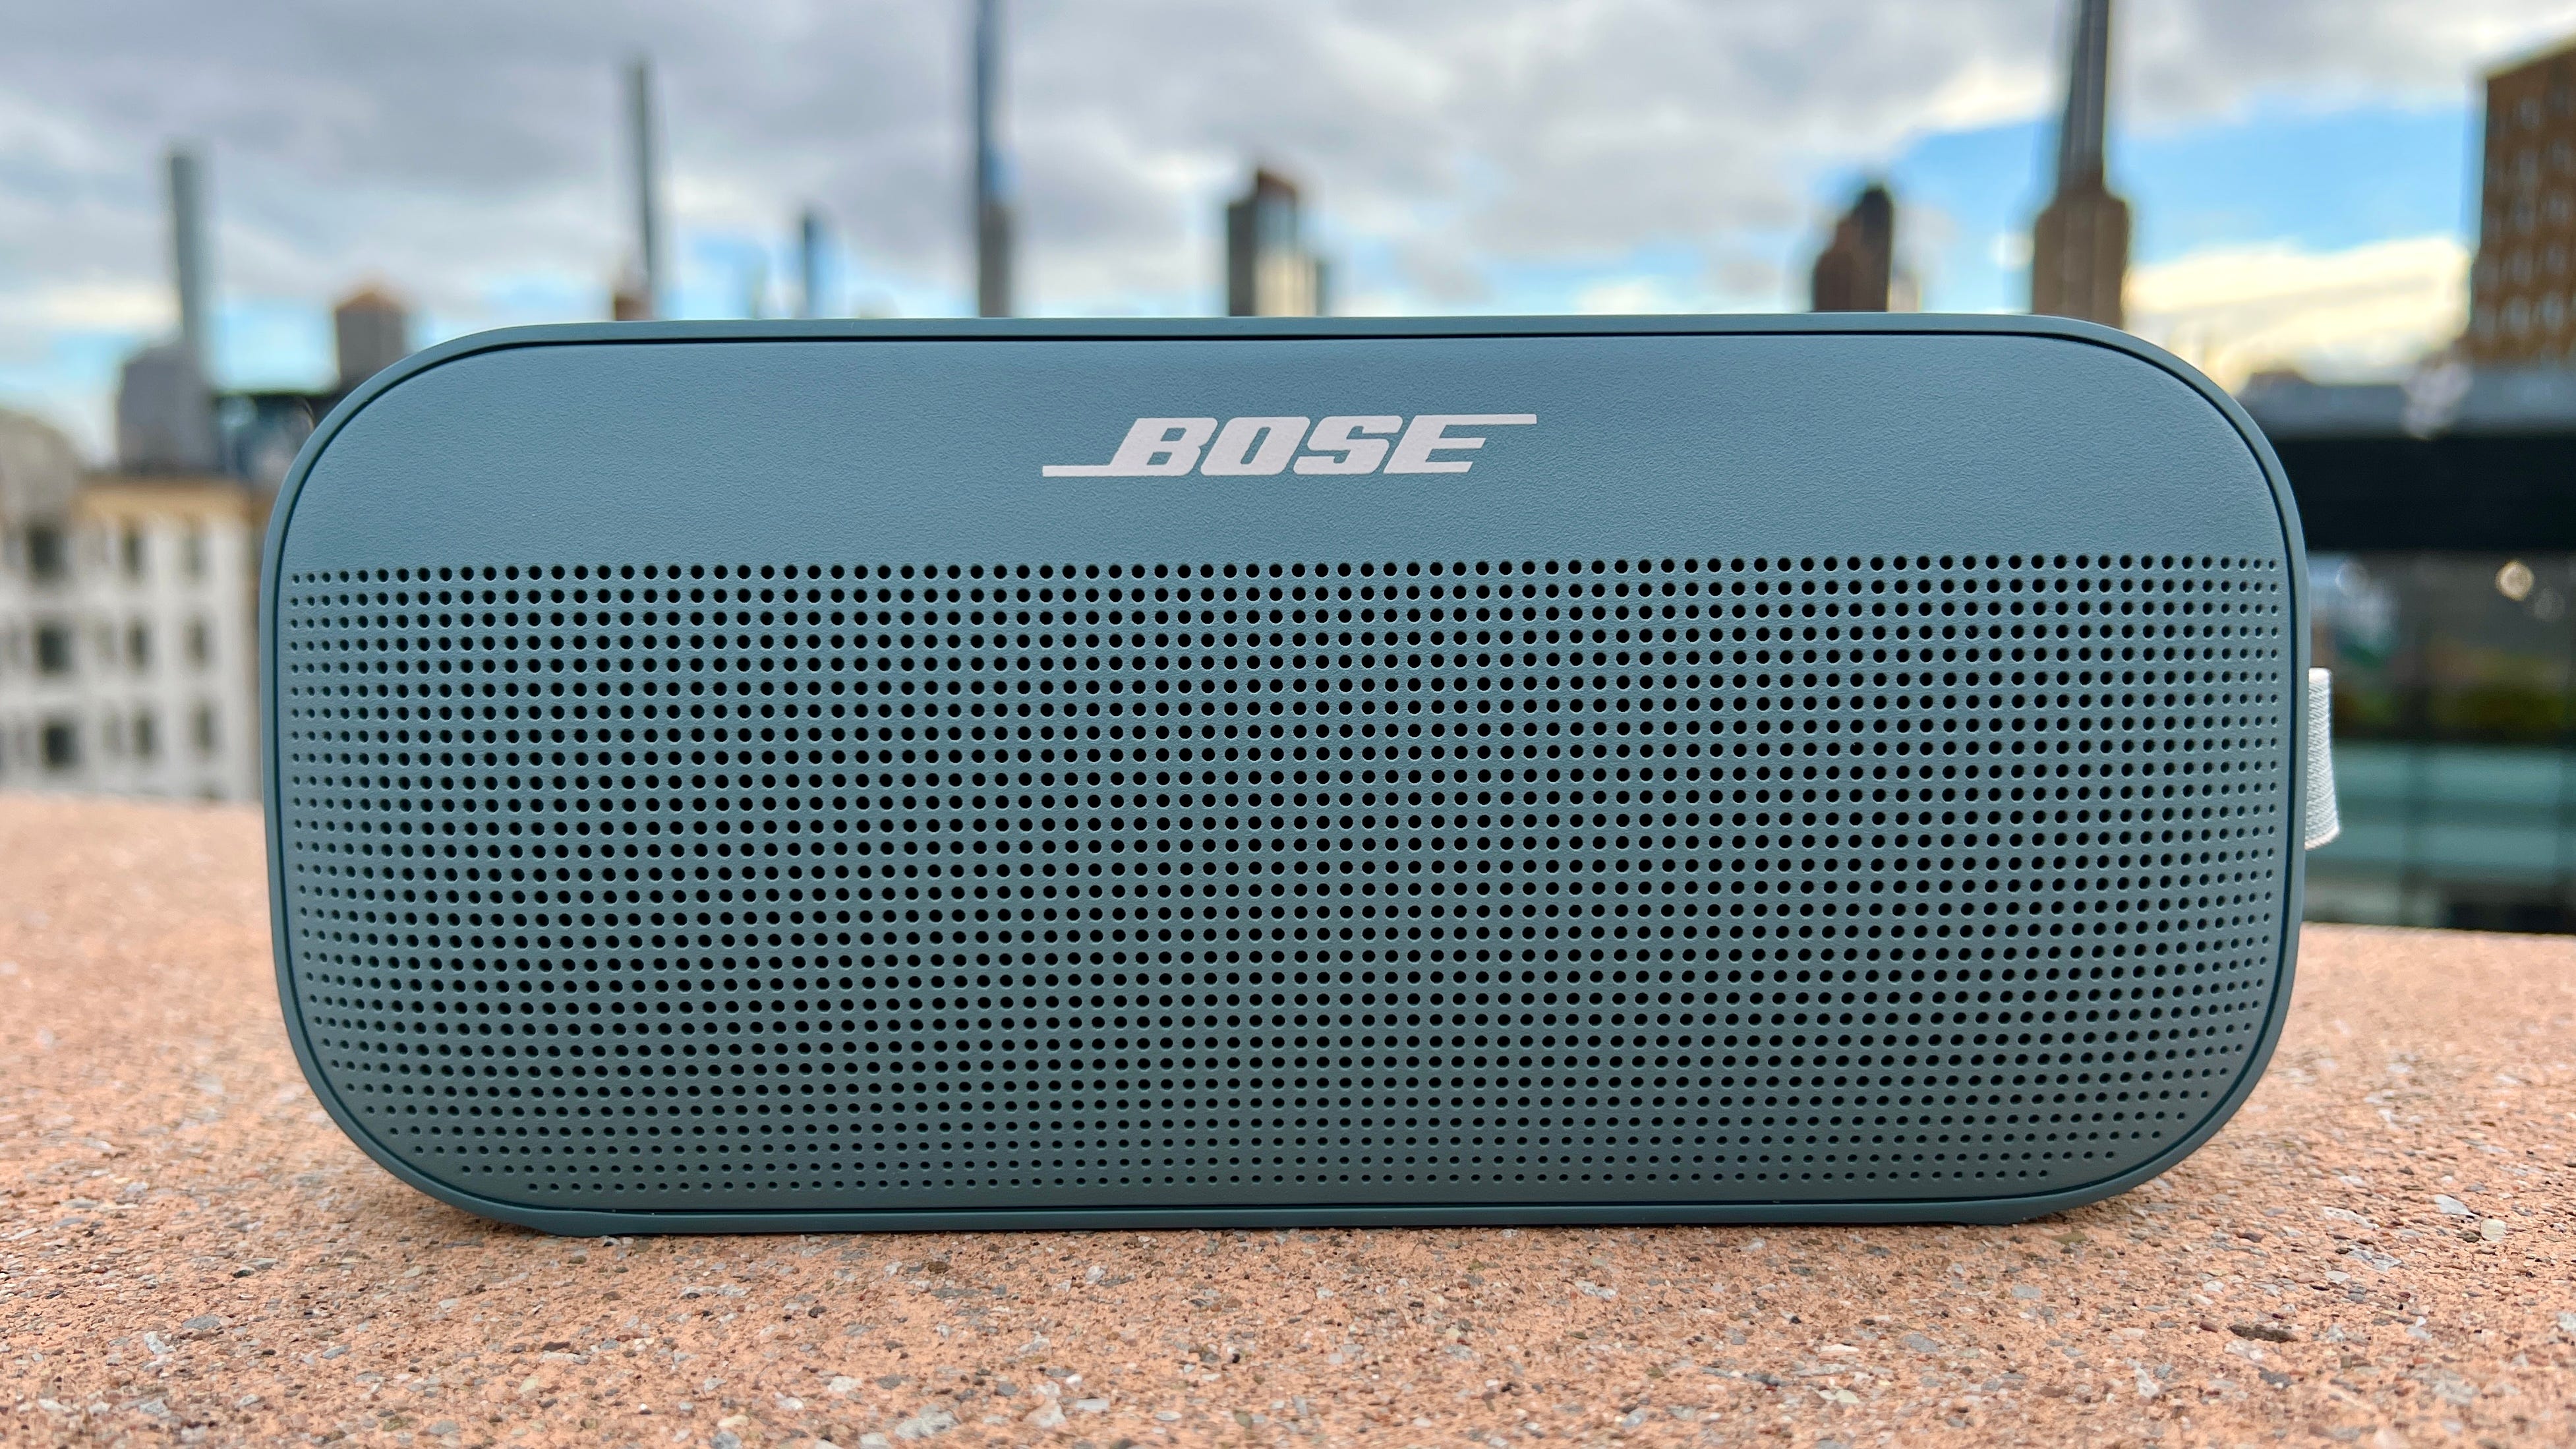 SoundLink review: mini Bluetooth speaker you can buy right now - CNET